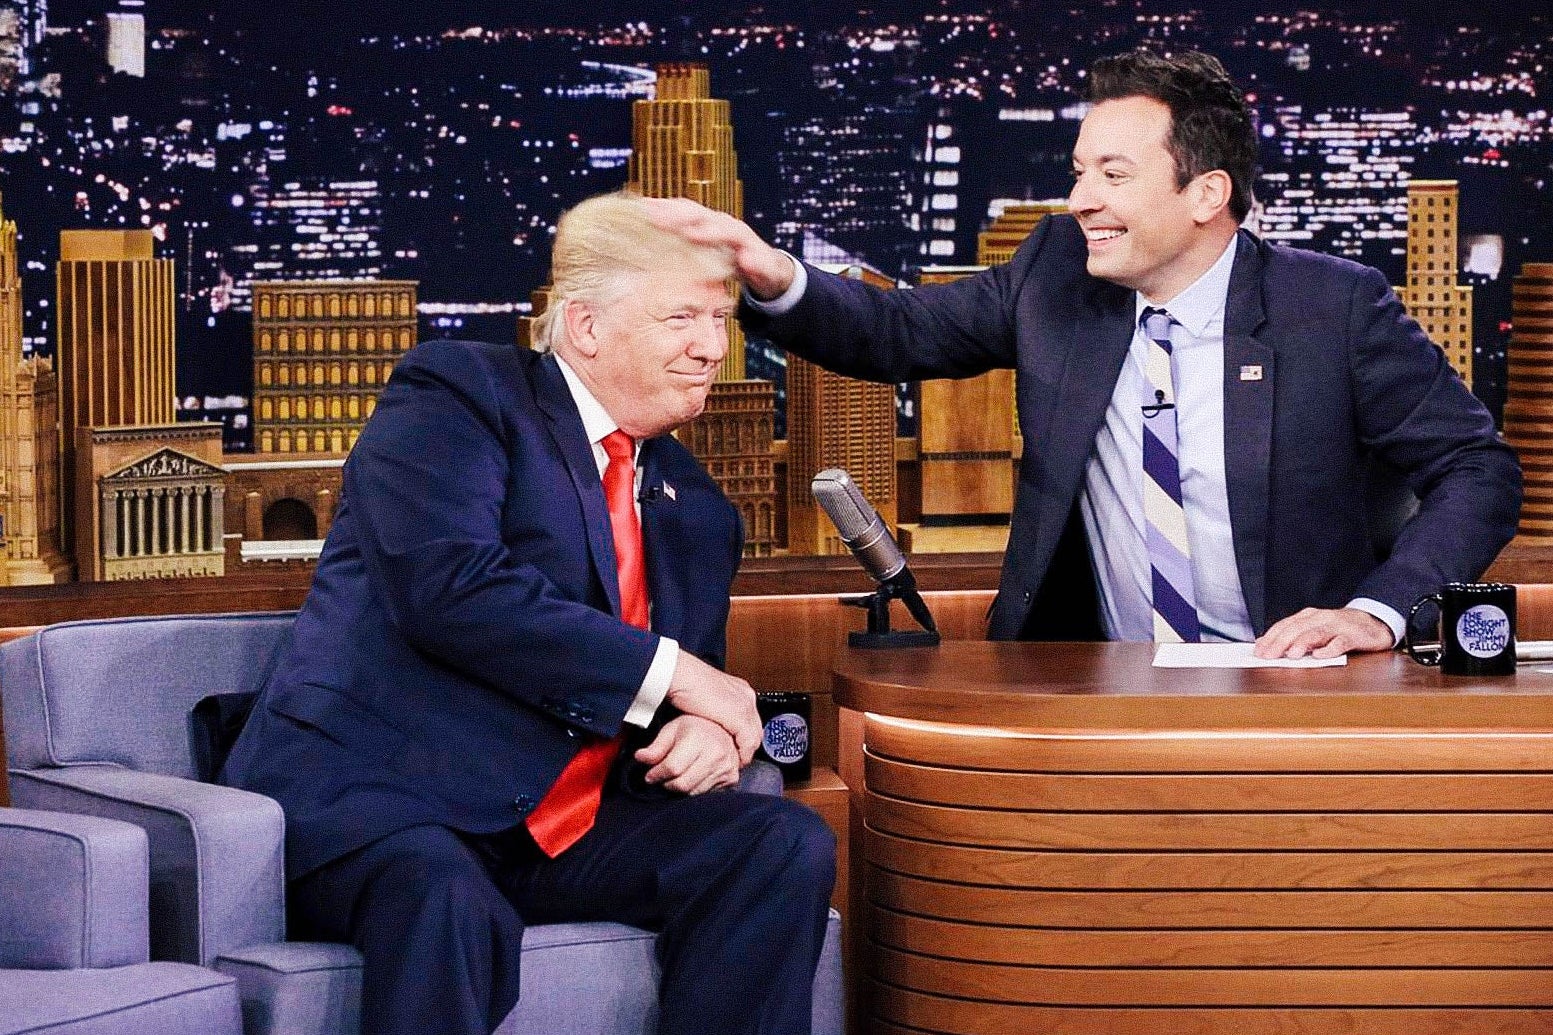 A smiling Jimmy Fallon musses Trump's hair with his hand.